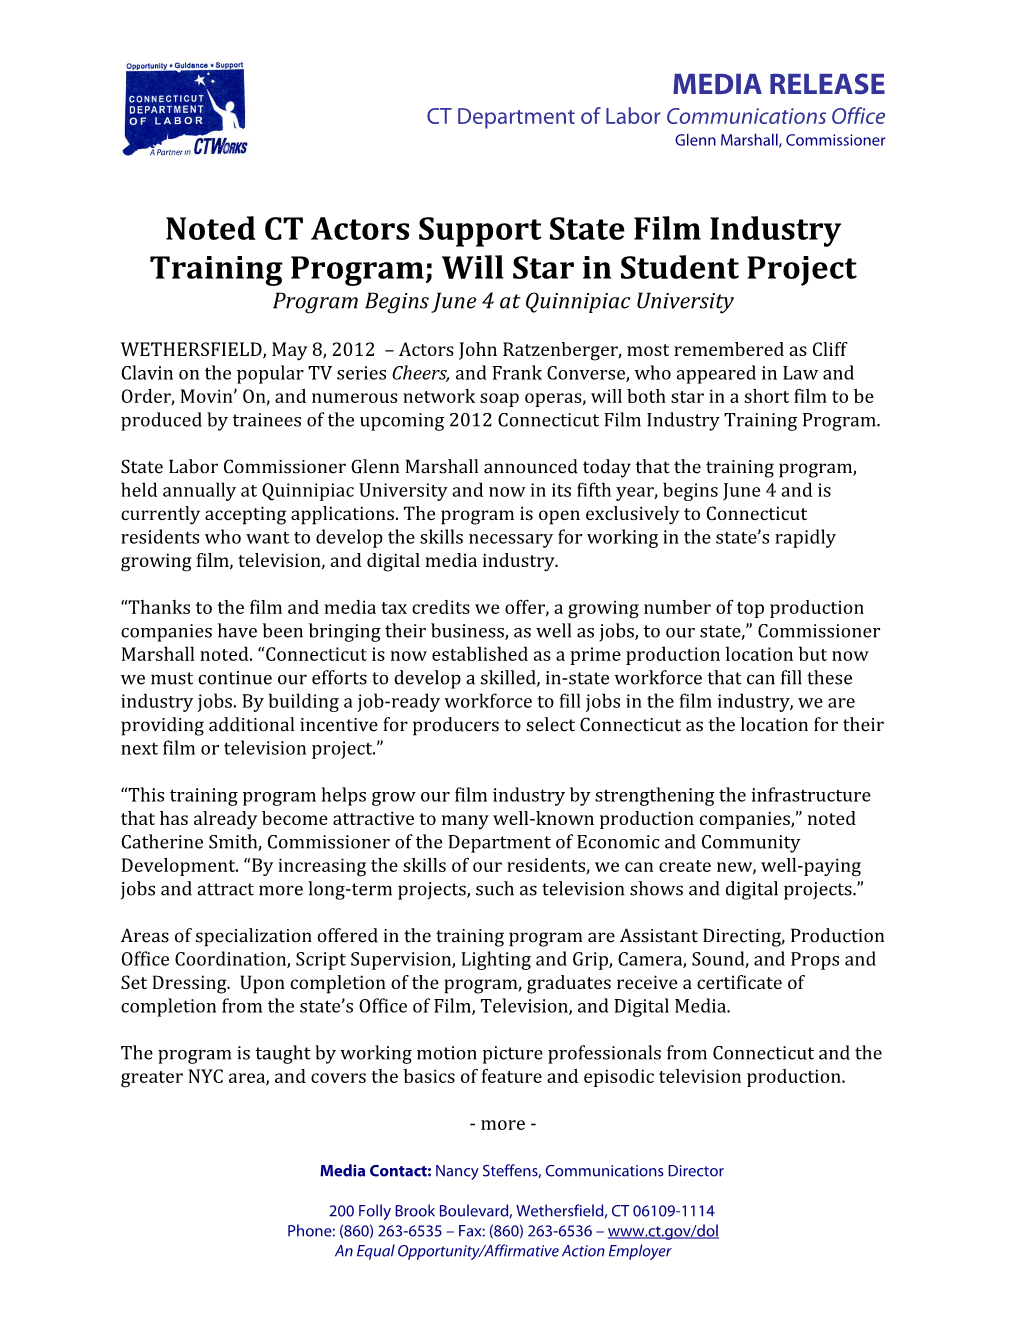 Noted CT Actors Support State Film Industry Training Program; Will Star in Student Project Program Begins June 4 at Quinnipiac University